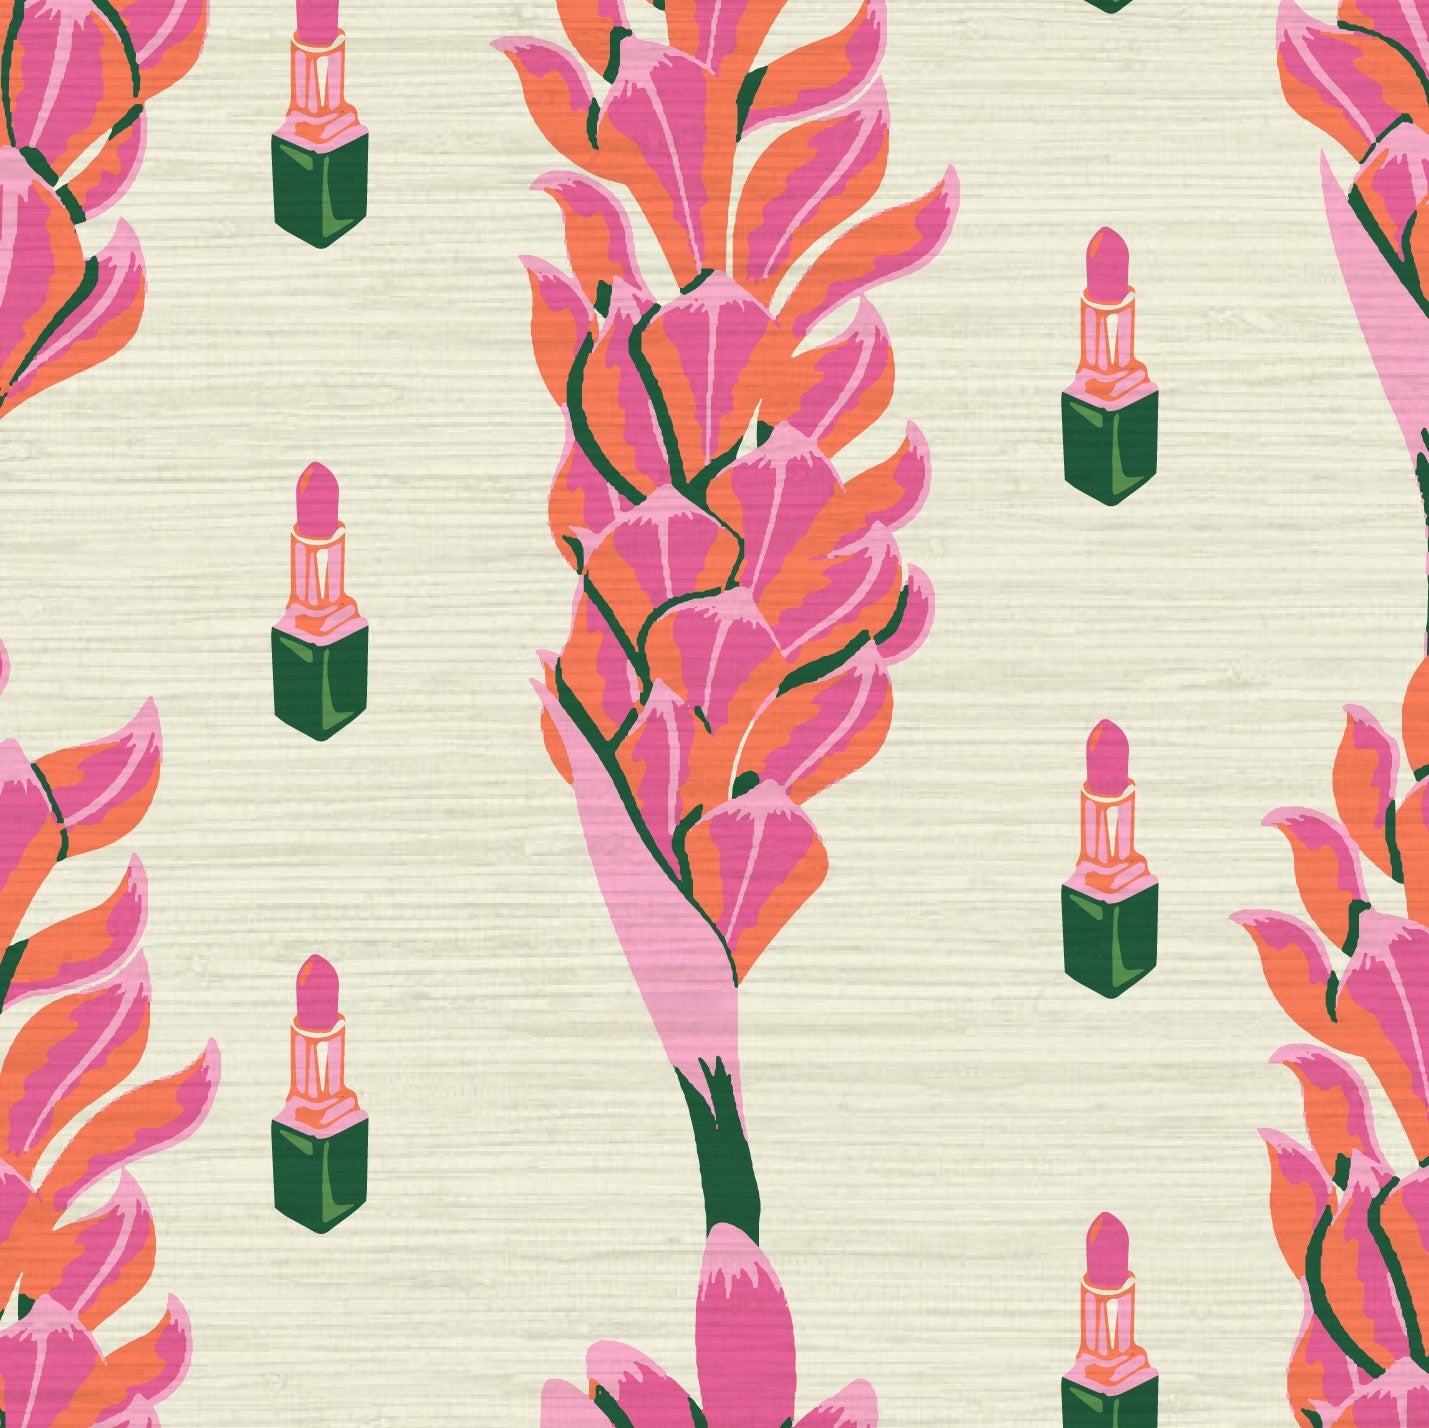 Grasscloth wallpaper Natural Textured Eco-Friendly Non-toxic High-quality  Sustainable Interior Design Bold Custom Tailor-made Retro chic Bold beauty bar salon vertical stripe botanical floral flowers lipstick makeup pink hot pain baby pink jungle tropical garden bathroom